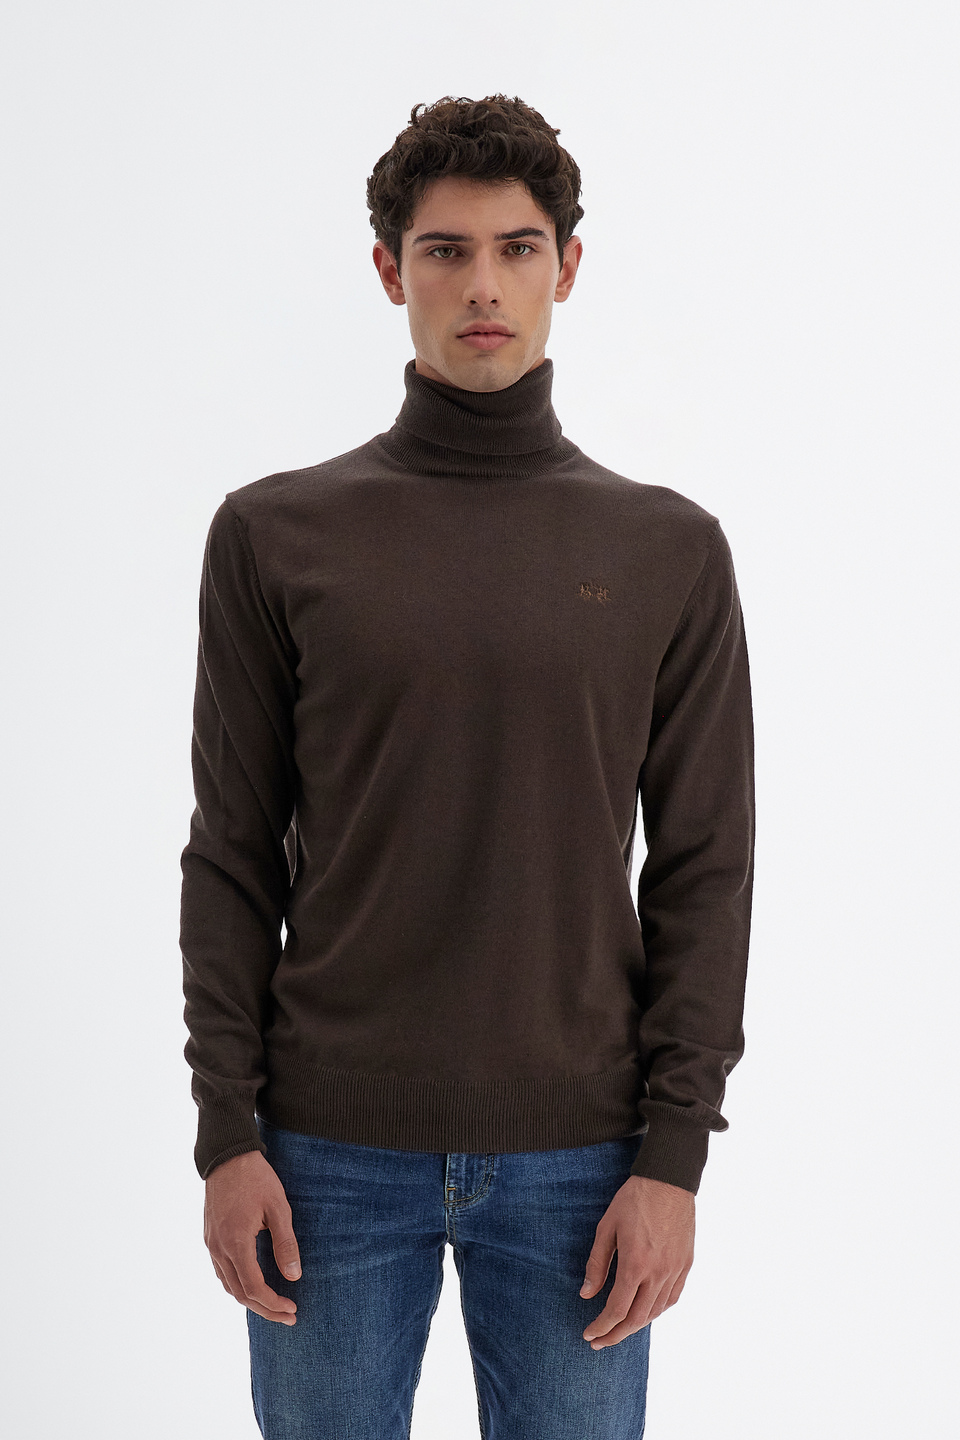 Men’s sweater with long sleeves high neck in cotton and wool blend regular fit | La Martina - Official Online Shop